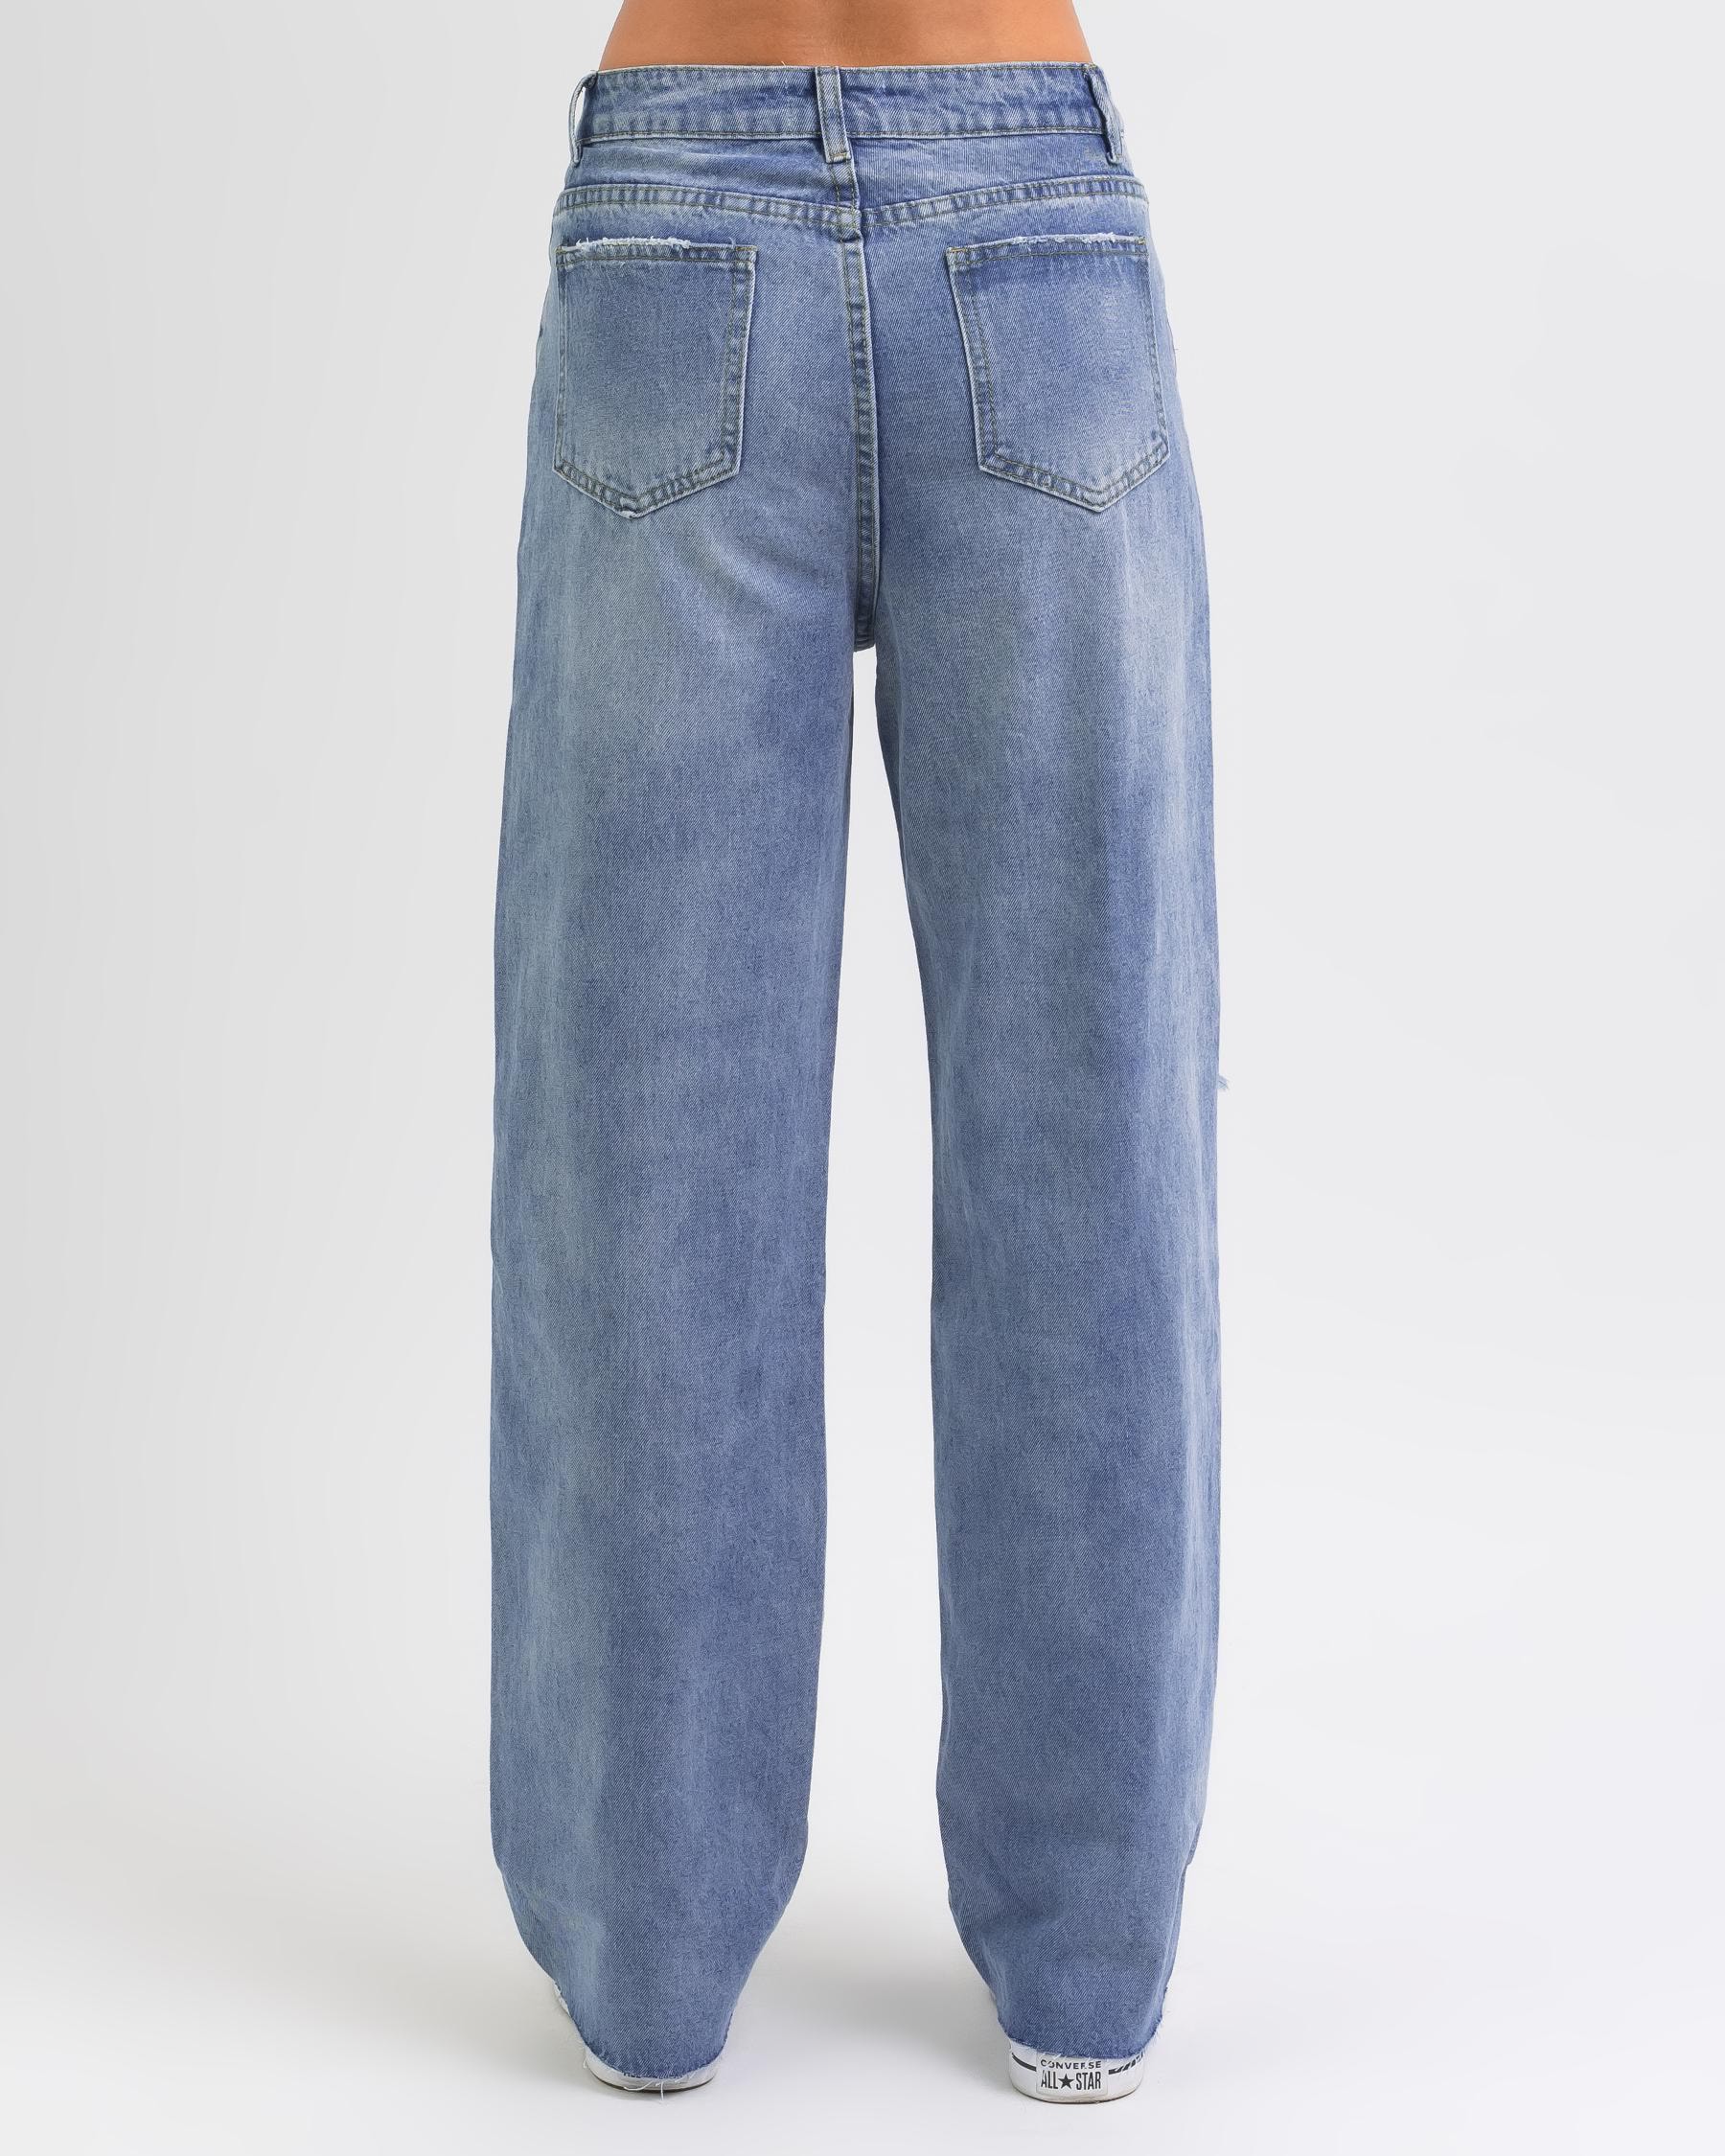 DESU Chelsea Jeans In Mid Blue - Fast Shipping & Easy Returns - City ...